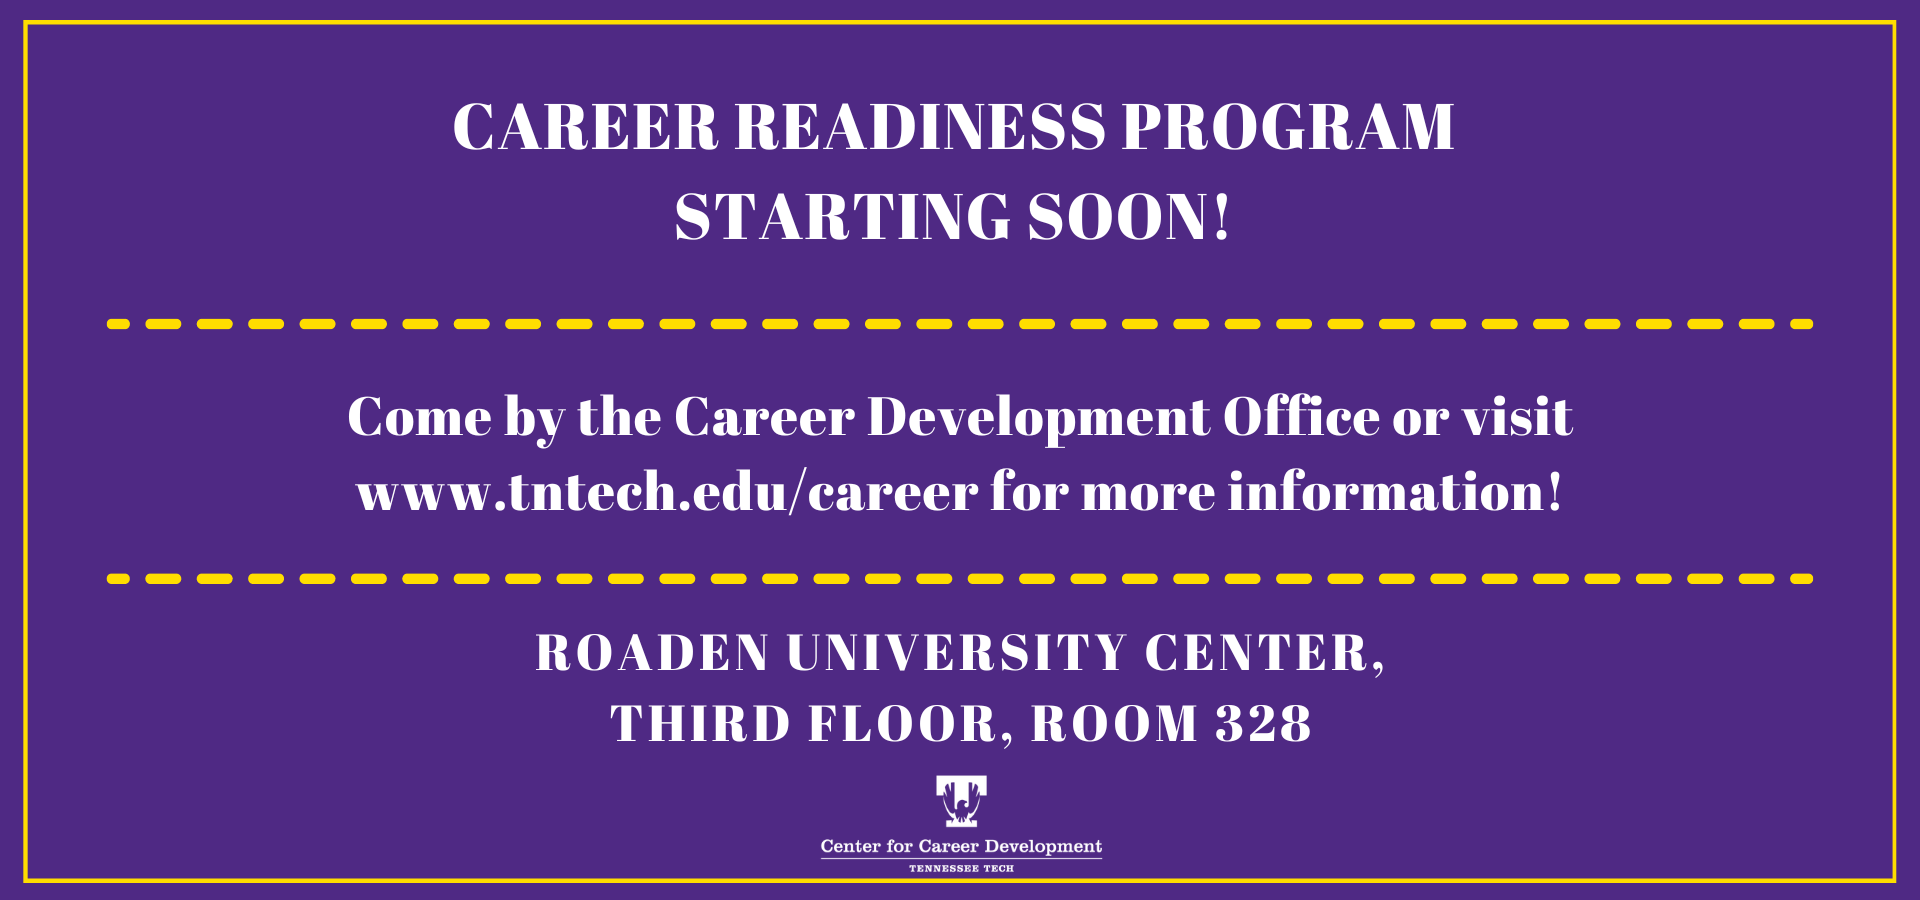 Career Readiness Application Deadline on Nov. 14th at 4 PM